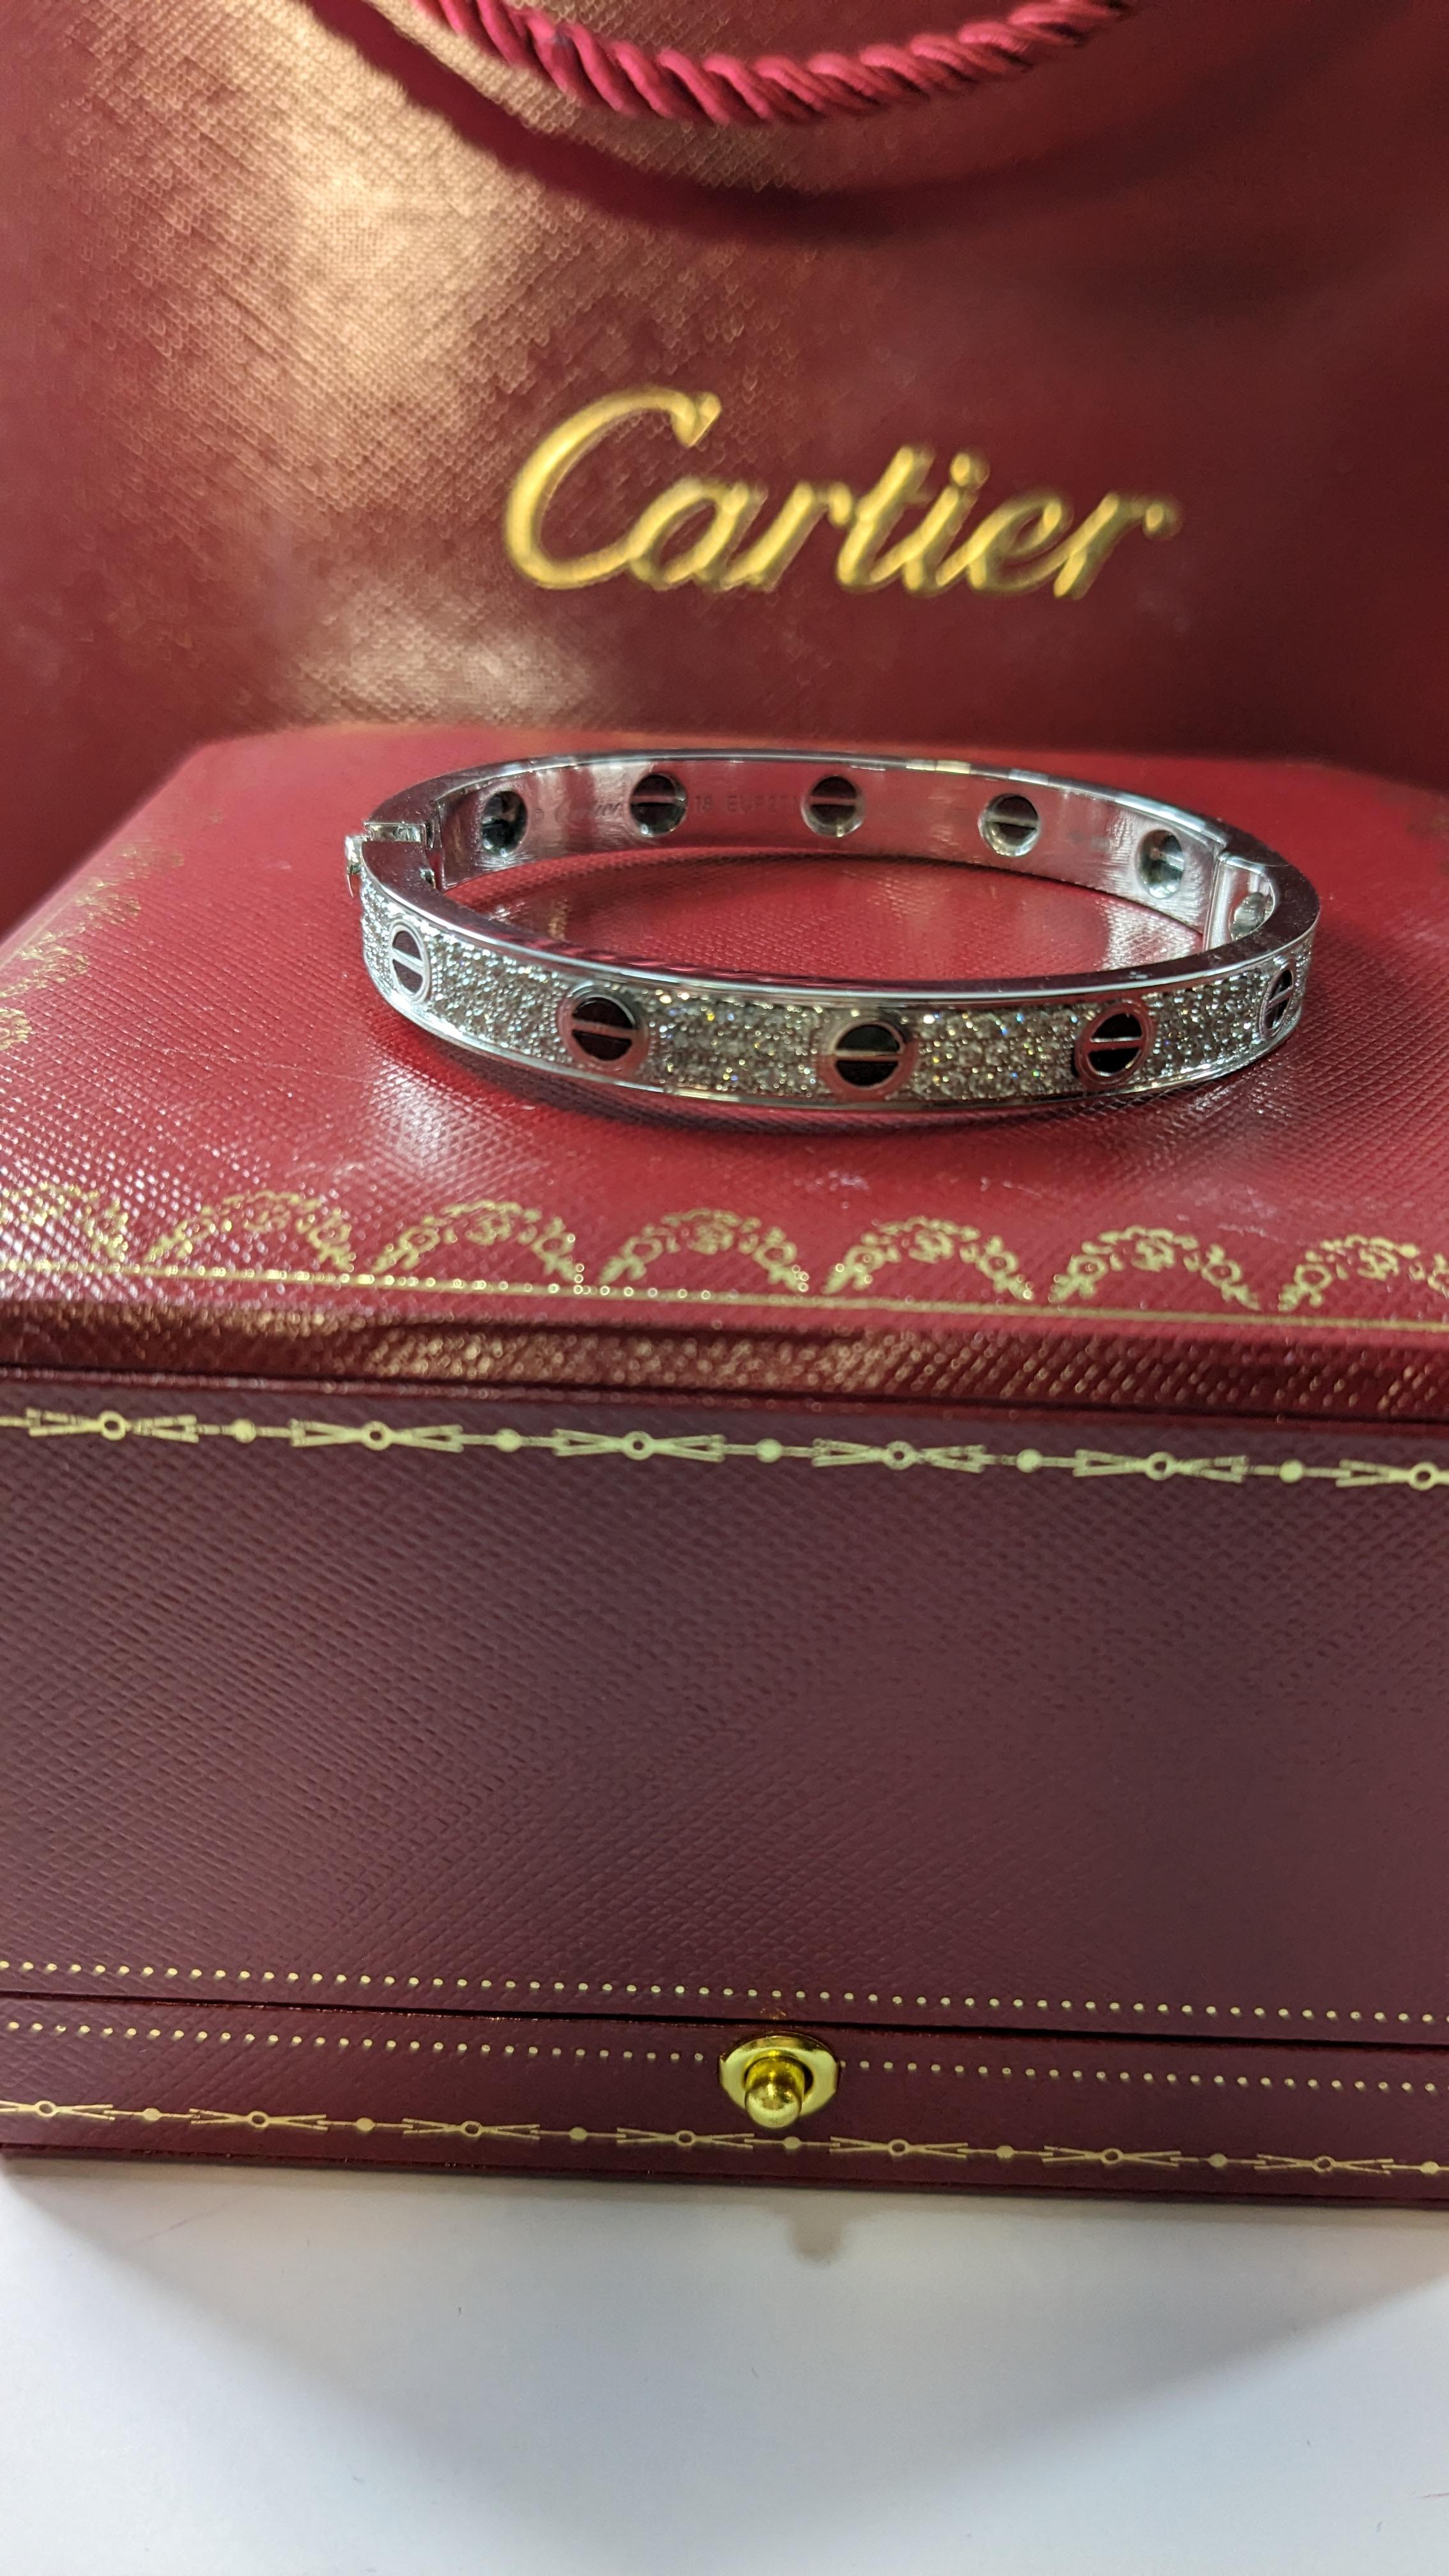 CARTIER LOVE BRACELET size 18
Cartier 'Love' bangle bracelet crafted in 18 karat white gold with diamond screw tops and pave set round brilliant cut diamonds (D-F in color, VVS clarity), ceramique noir
Signed Cartier 750, with serial number and